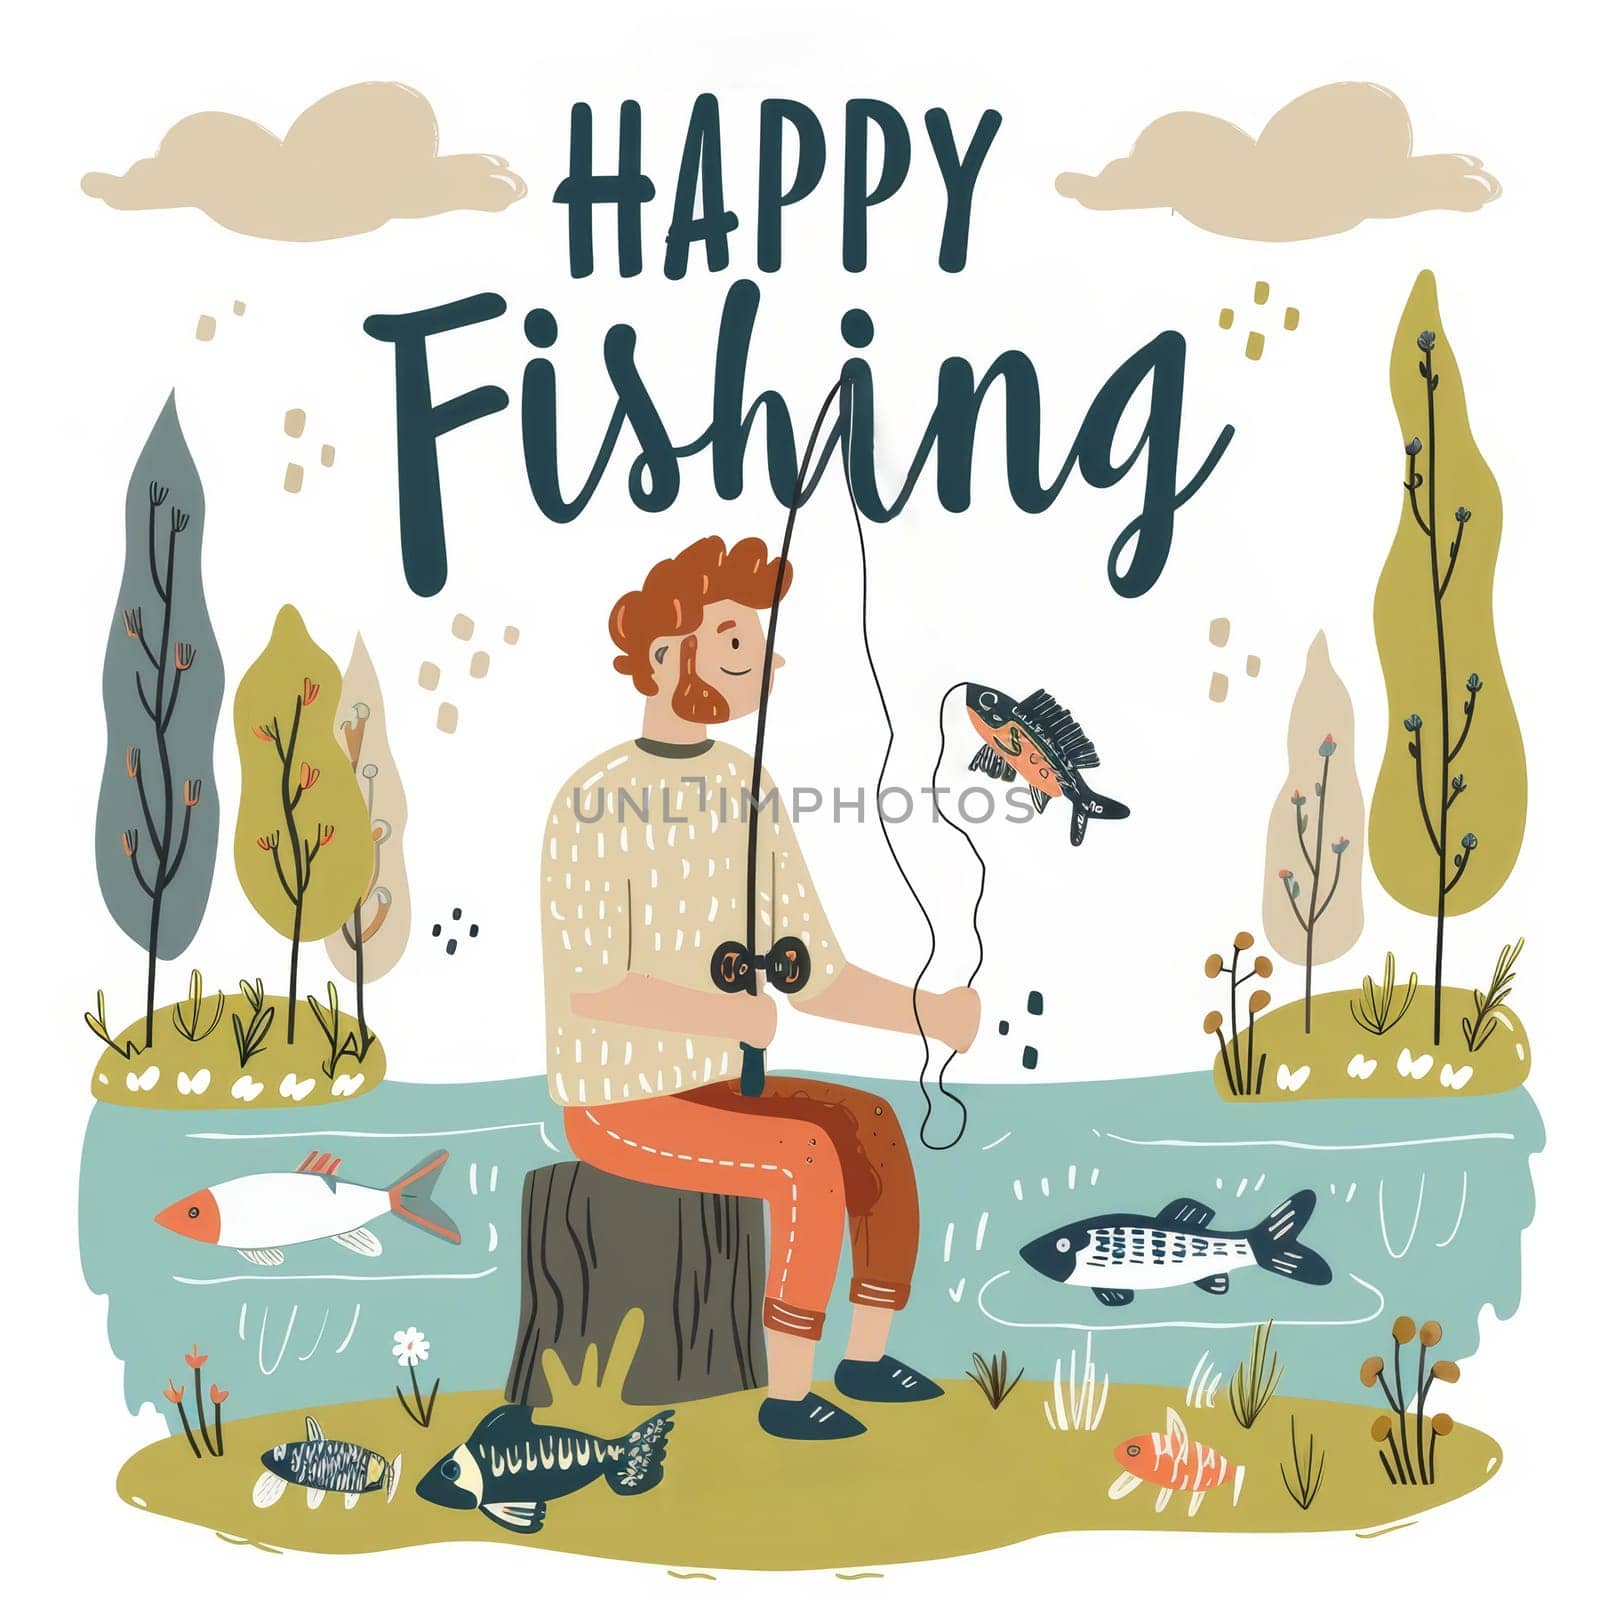 A whimsical illustration captures a solo fishing excursion, with a Happy Happy Fishing message and Fathers Day fish tags adding a festive touch